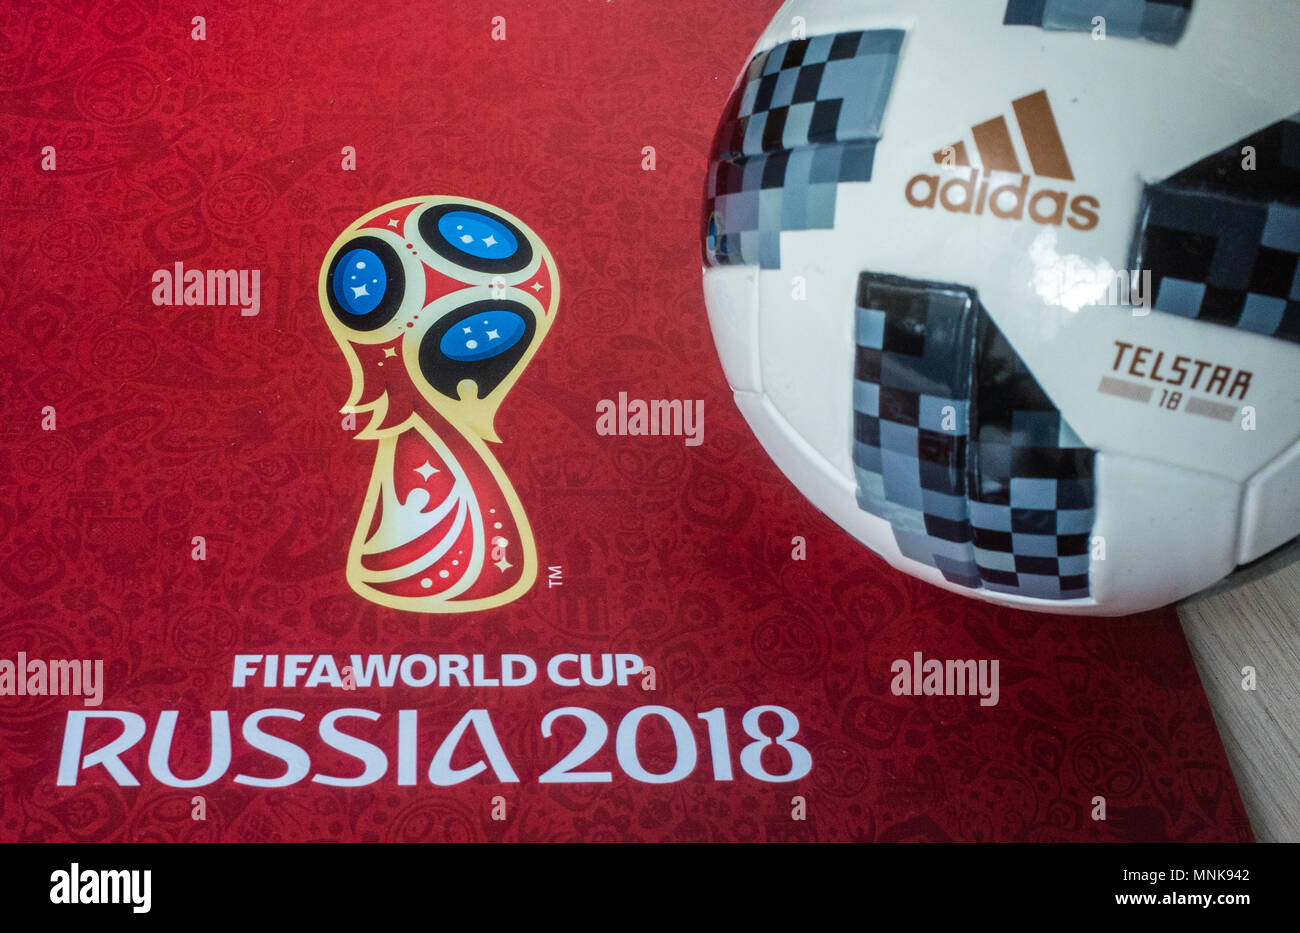 8 April 2018 Moscow, Russia Official ball of the 2018 FIFA World Cup Adidas Telstar 18 and a calendar with the symbols of the World Cup 2018 Stock Photo